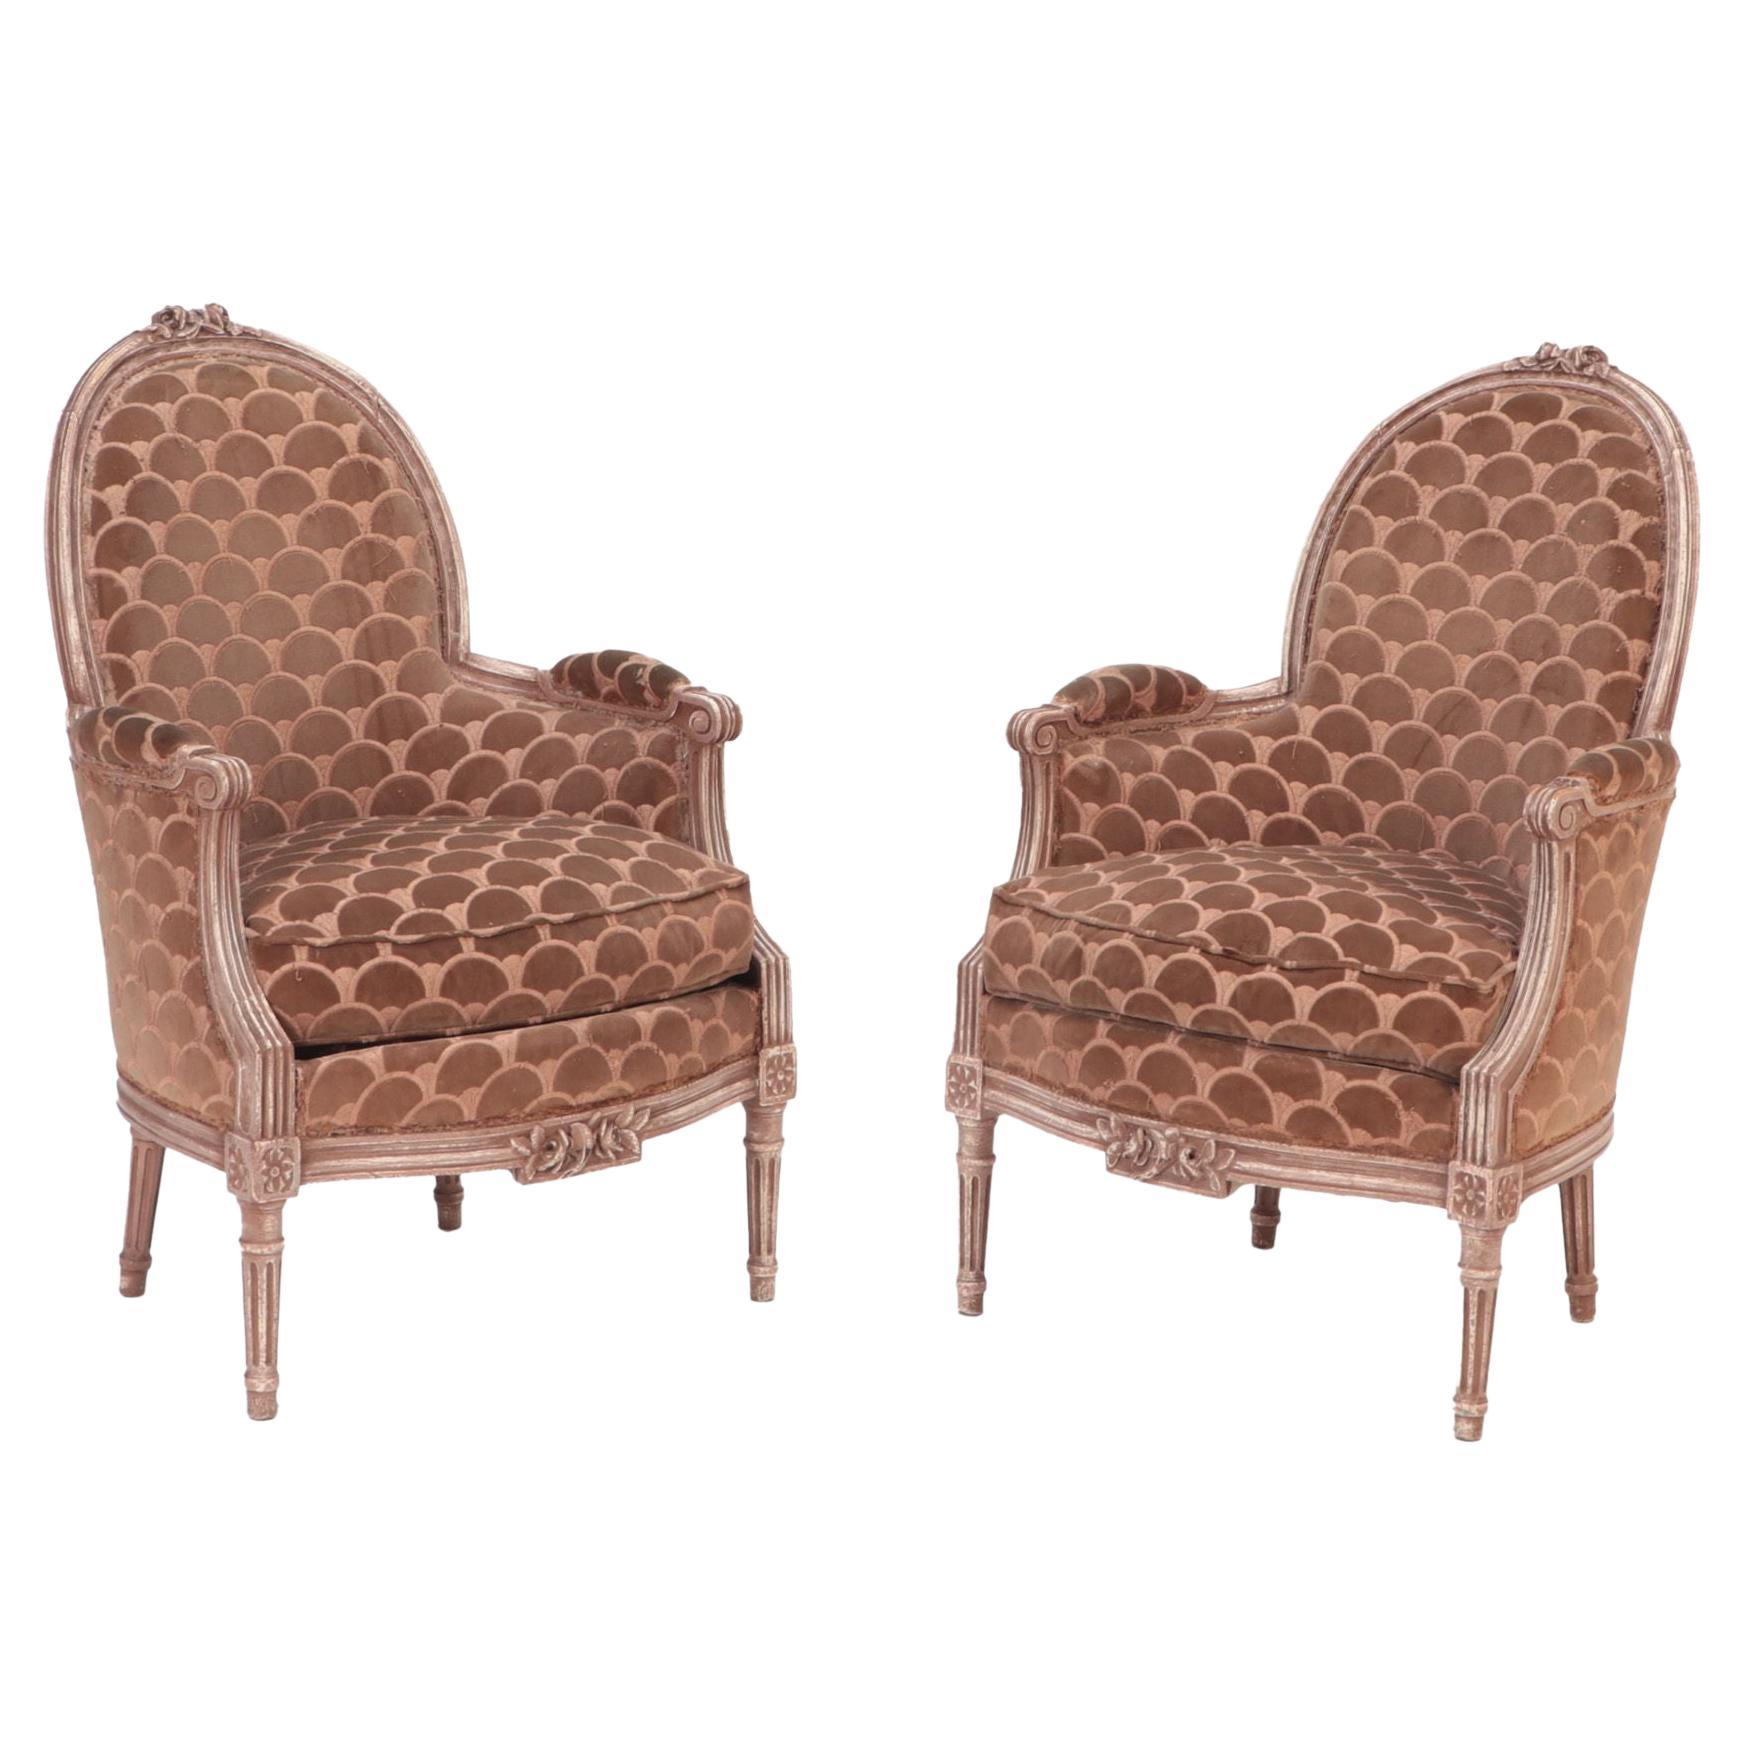 Pair of French Louis XVI Style Painted Wood Armchairs or Bergeres, C 1920